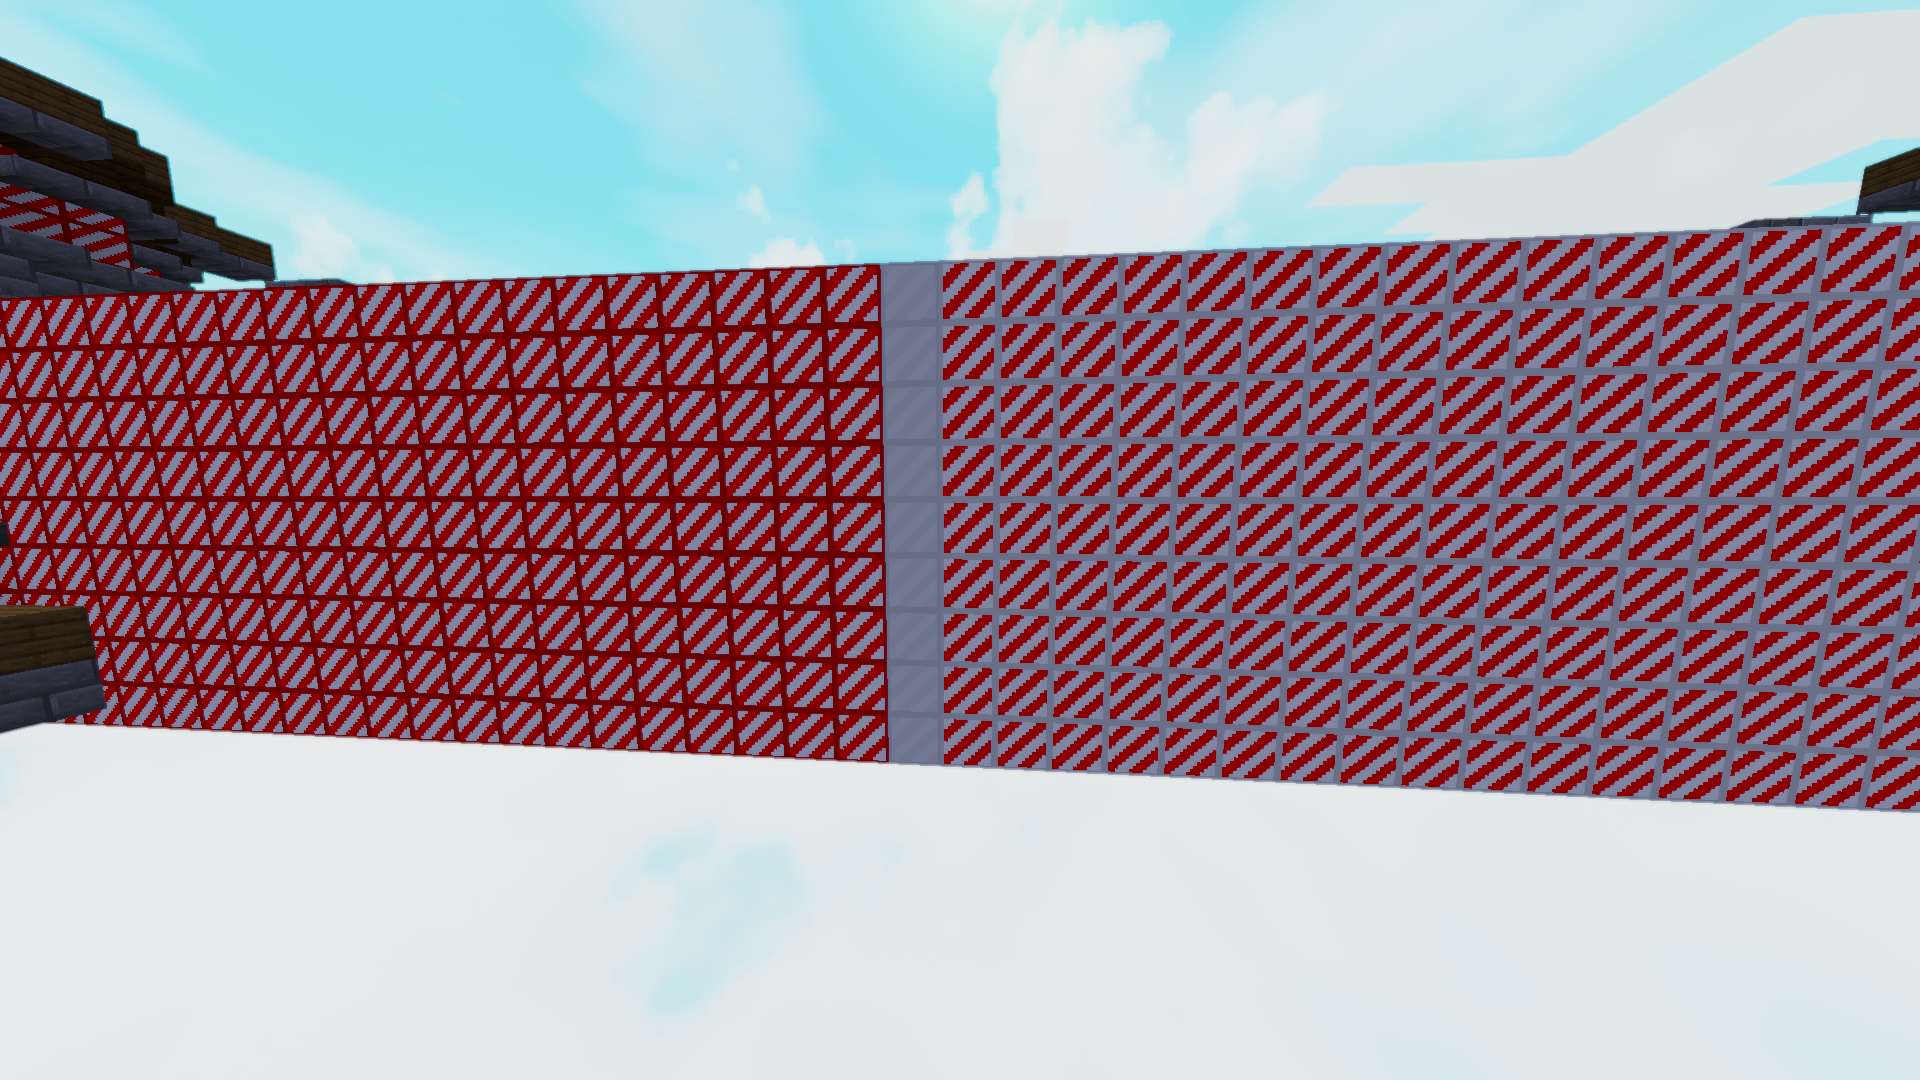 Candy Cane Bridge Overlay 16 by GemzelerMC on PvPRP